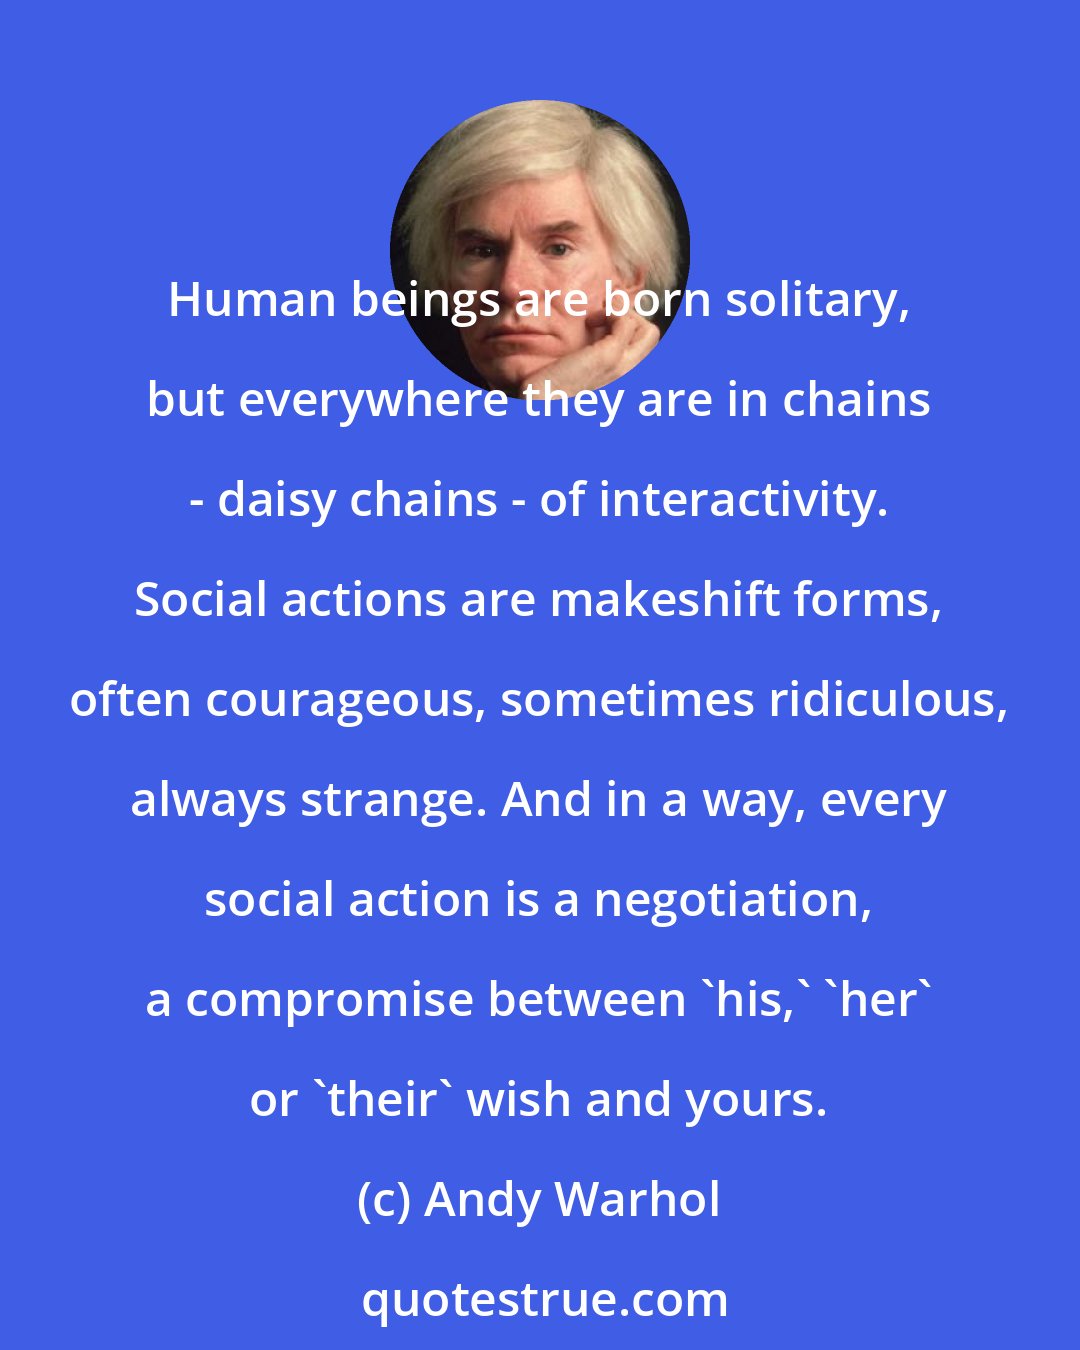 Andy Warhol: Human beings are born solitary, but everywhere they are in chains - daisy chains - of interactivity. Social actions are makeshift forms, often courageous, sometimes ridiculous, always strange. And in a way, every social action is a negotiation, a compromise between 'his,' 'her' or 'their' wish and yours.